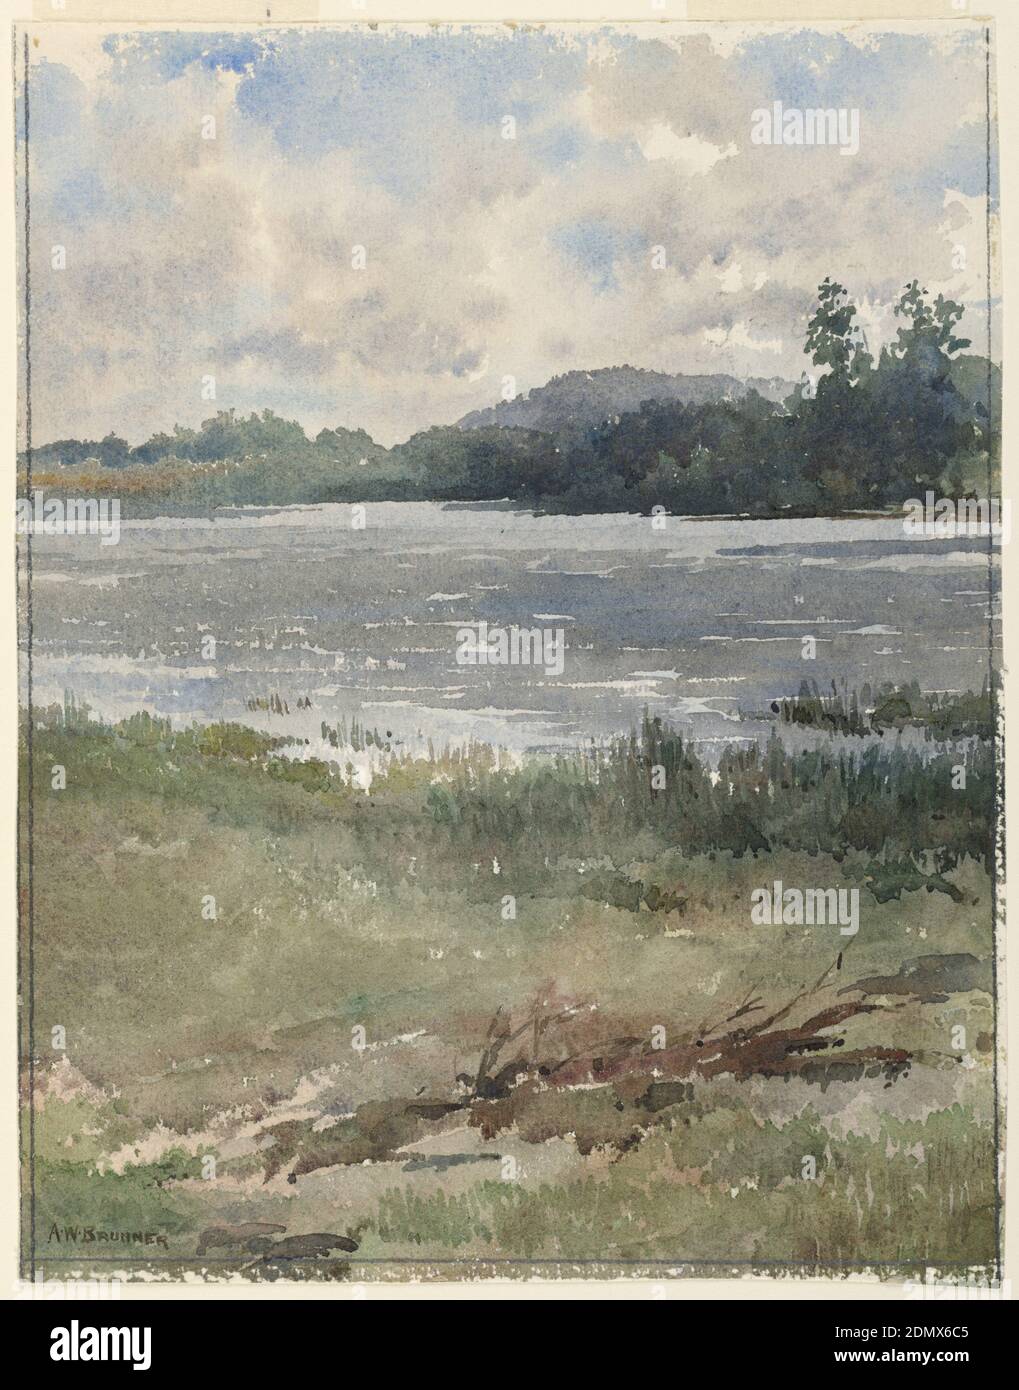 Lakeside Landscape, Arnold William Brunner, American, 1857–1925, Brush and watercolor, three borders ruled in graphite on off-white wove paper., View, from grassy shore in the foreground, of a lake with trees and dense foliage on far shore, and low hills in the background. Partly cloudy blue sky above., USA, ca. 1890, landscapes, Drawing Stock Photo